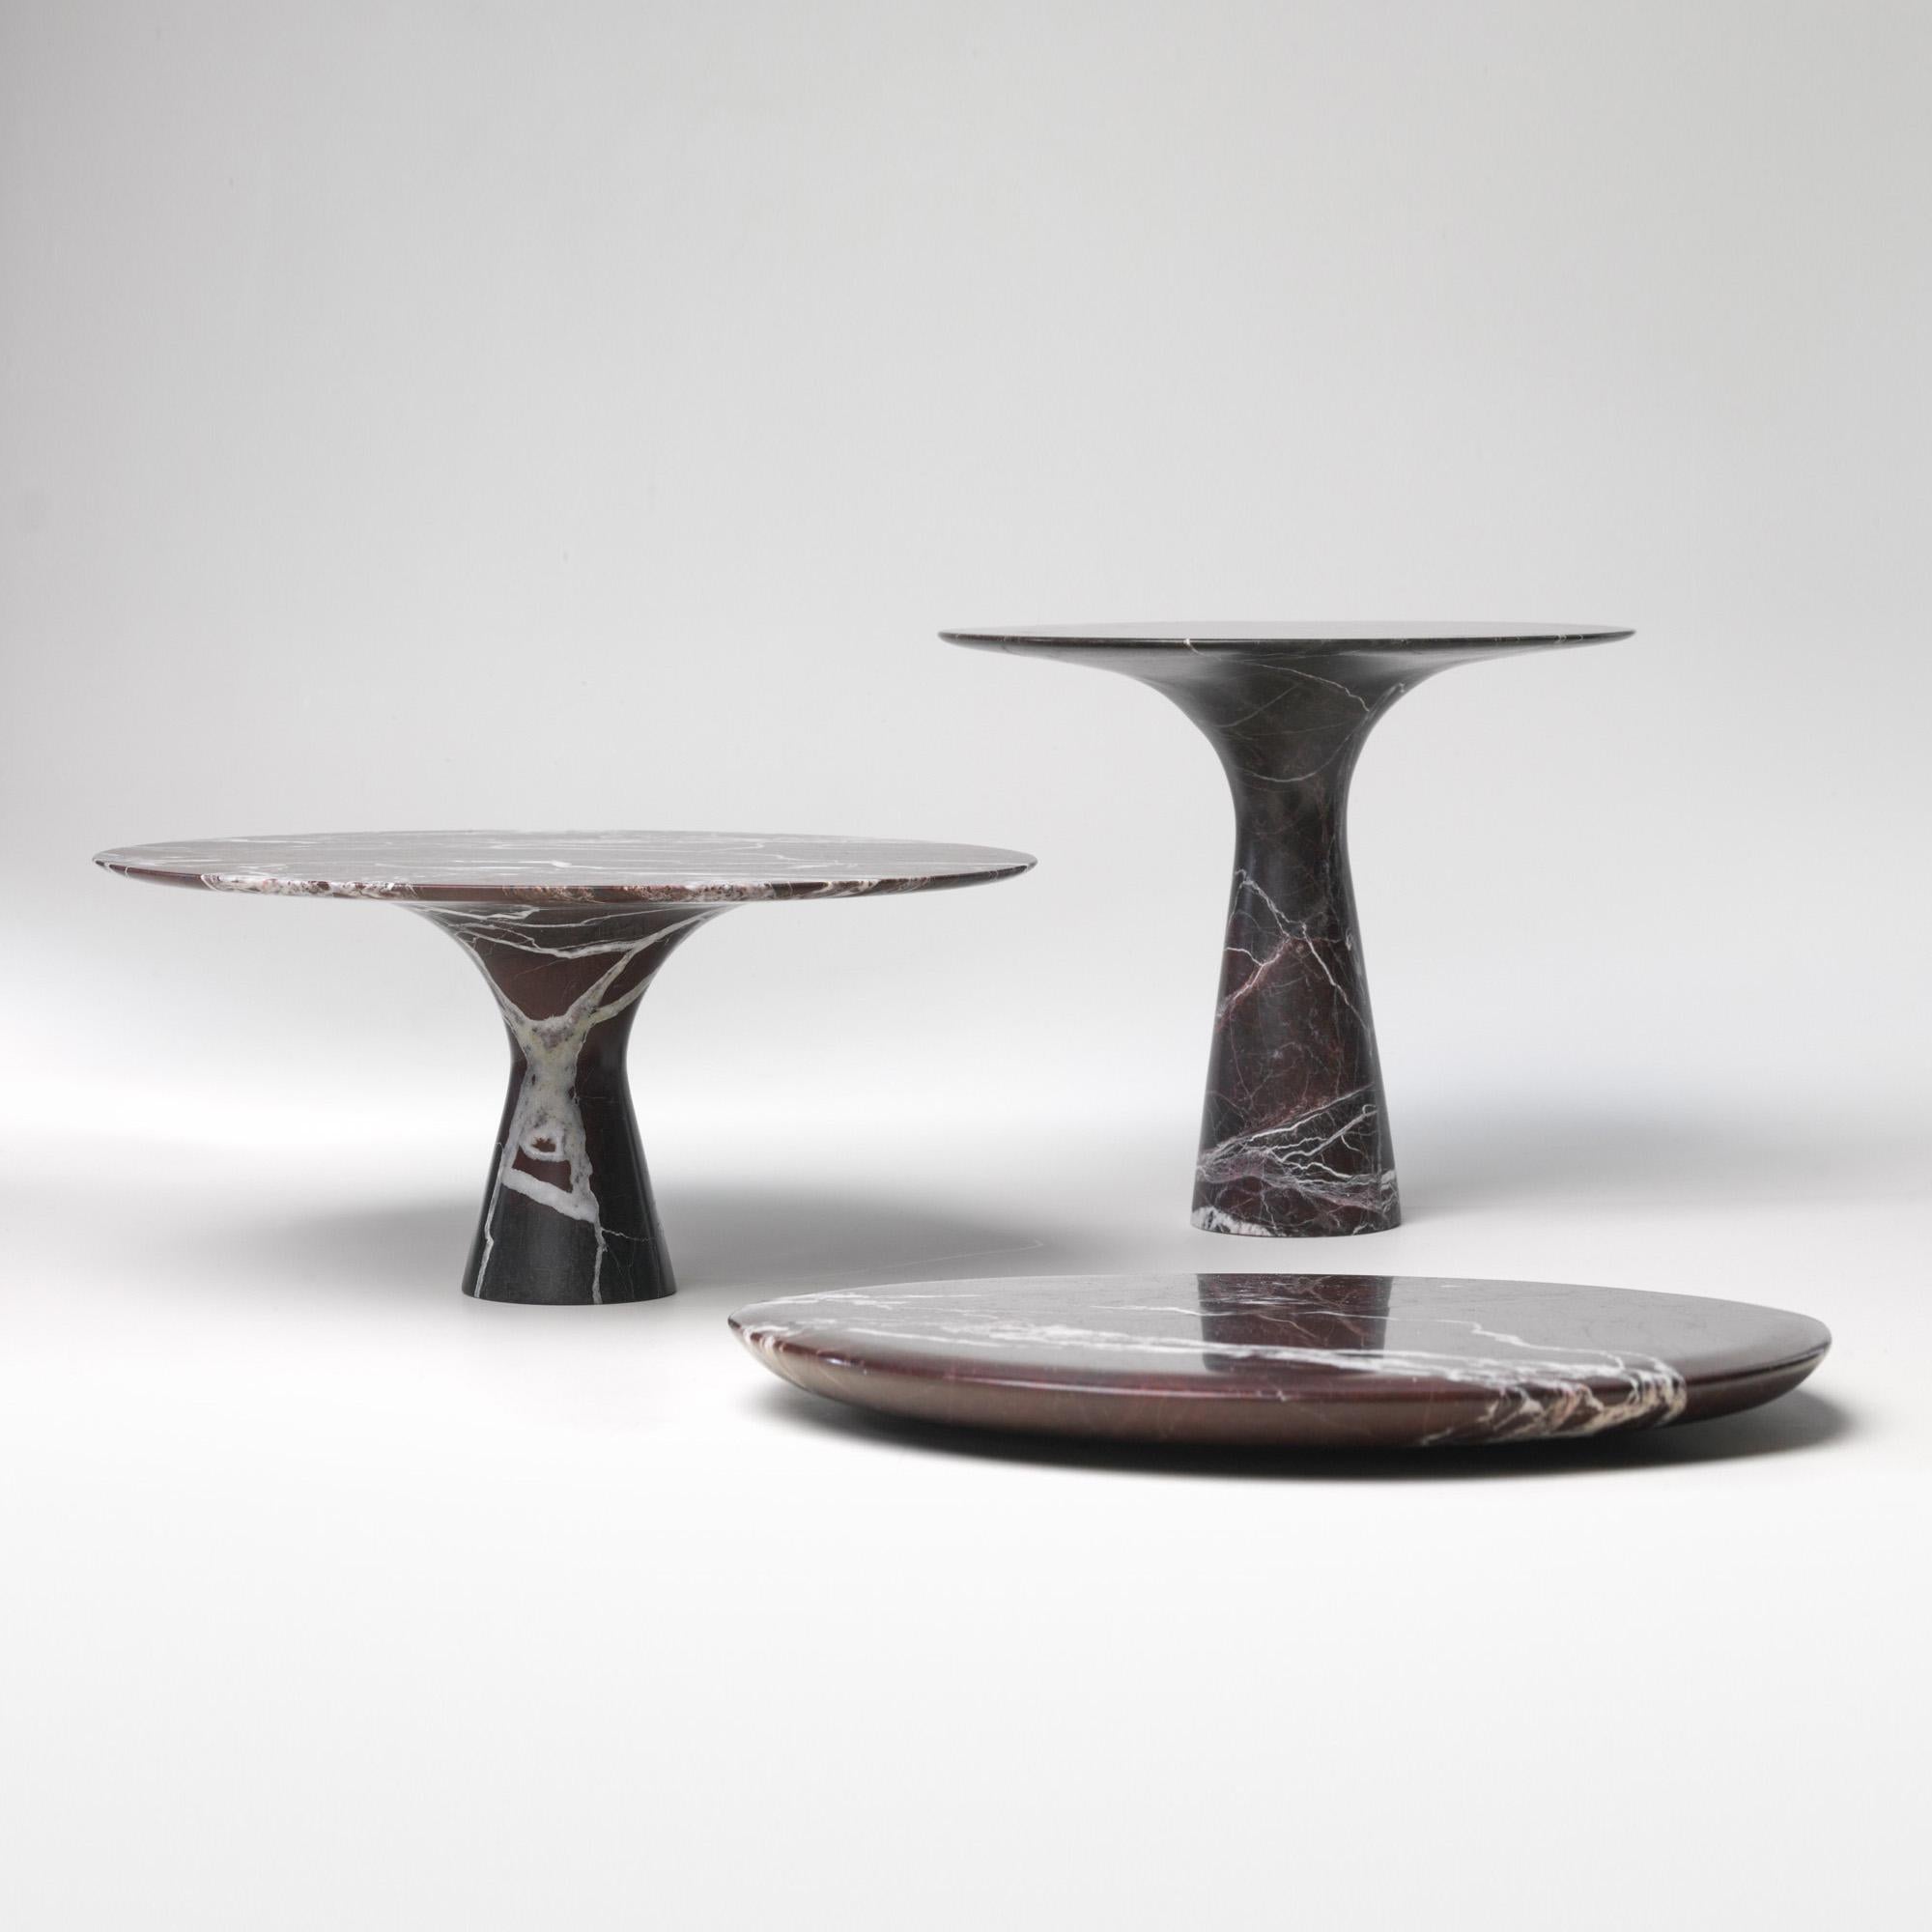 Set of 3 Refined Contemporary Marble Rosso Lepanto Marble Cake Stands and Plate
Signed by Leo Aerts.
Dimensions: 
D 26 x H 22.5 cm 
D 32 x H 15 cm
D 32 x H 2 cm
Material: Rosso Lepanto marble
Technique: Polished, carved. 

Available in marble: